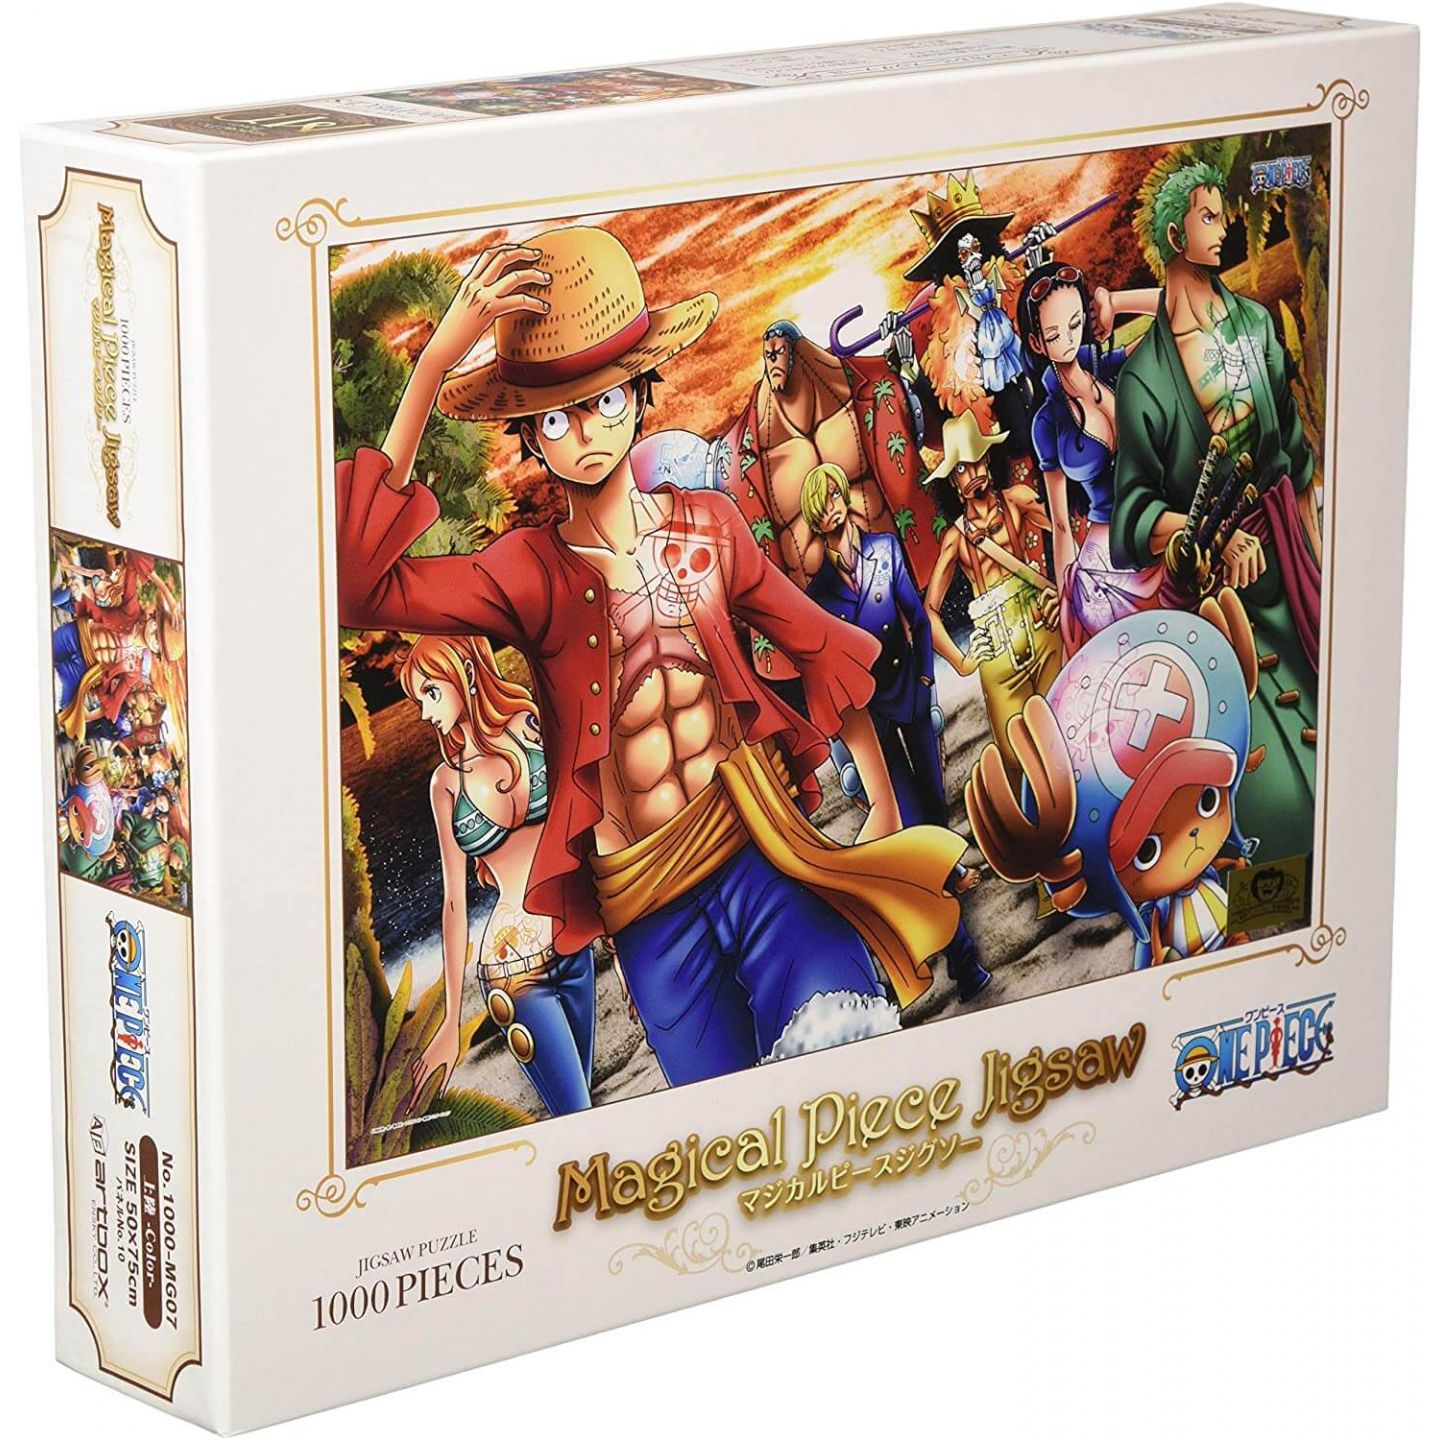 Anime One Piece Monkey D Luffy 265x265 1000 Piece Circular Puzzle  Brain Intelligence Challenge Great for Lovers Couple Paper Puzzle  Walmart  Canada